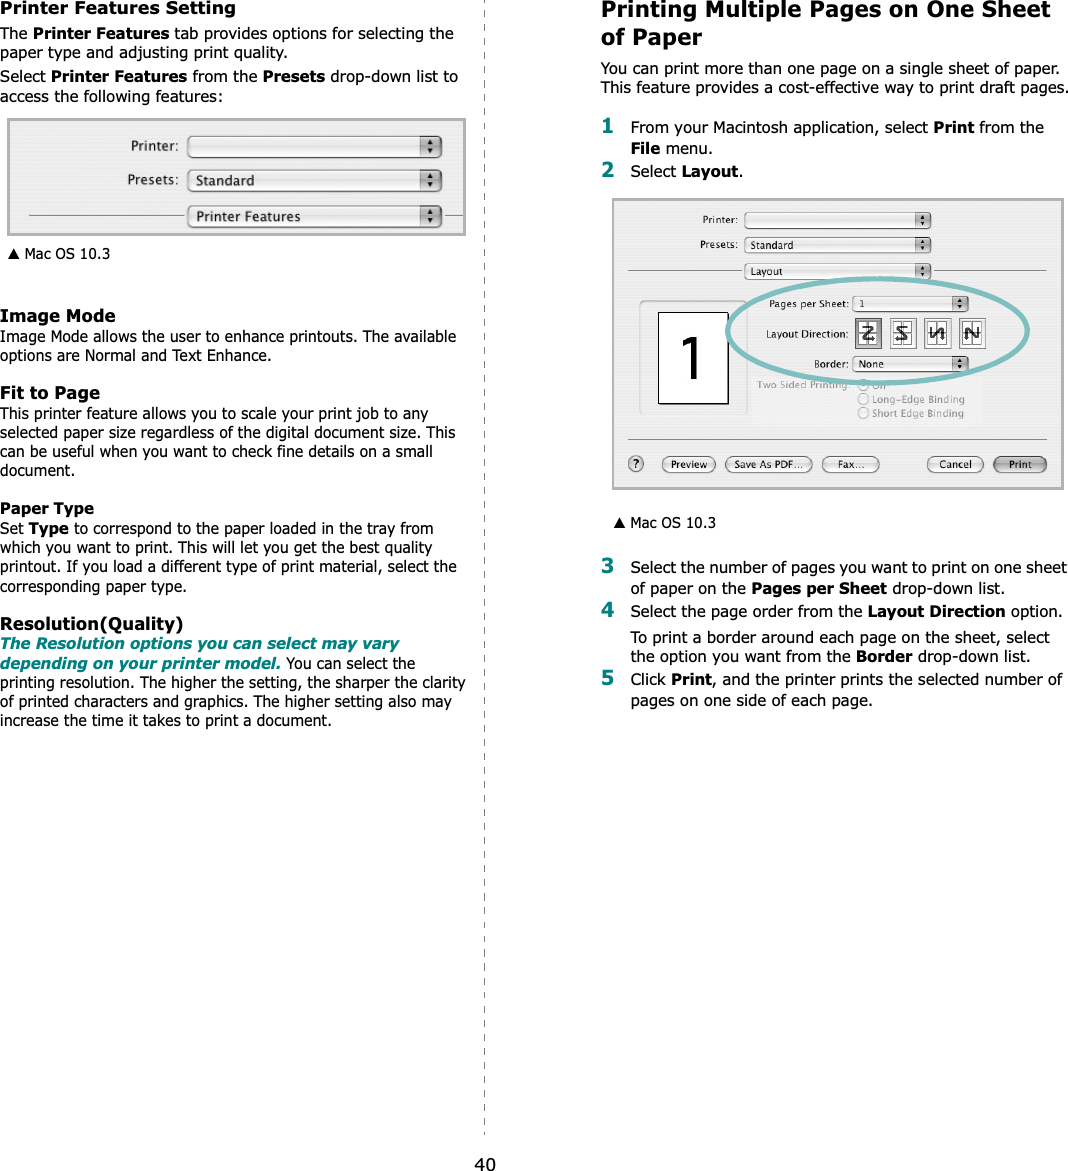 40Printer Features SettingThe Printer Features tab provides options for selecting the paper type and adjusting print quality.Select Printer Features from the Presets drop-down list to access the following features:Image ModeImage Mode allows the user to enhance printouts. The available options are Normal and Text Enhance. Fit to PageThis printer feature allows you to scale your print job to any selected paper size regardless of the digital document size. This can be useful when you want to check fine details on a small document.   Paper TypeSet Type to correspond to the paper loaded in the tray from which you want to print. This will let you get the best quality printout. If you load a different type of print material, select the corresponding paper type.  Resolution(Quality)The Resolution options you can select may vary depending on your printer model. You can select the printing resolution. The higher the setting, the sharper the clarity of printed characters and graphics. The higher setting also may increase the time it takes to print a document.  ▲ Mac OS 10.3Printing Multiple Pages on One Sheet of PaperYou can print more than one page on a single sheet of paper. This feature provides a cost-effective way to print draft pages.1From your Macintosh application, select Print from the File menu. 2Select Layout.3Select the number of pages you want to print on one sheet of paper on the Pages per Sheet drop-down list.4Select the page order from the Layout Direction option.To print a border around each page on the sheet, select the option you want from the Border drop-down list.5Click Print, and the printer prints the selected number of pages on one side of each page.▲ Mac OS 10.3